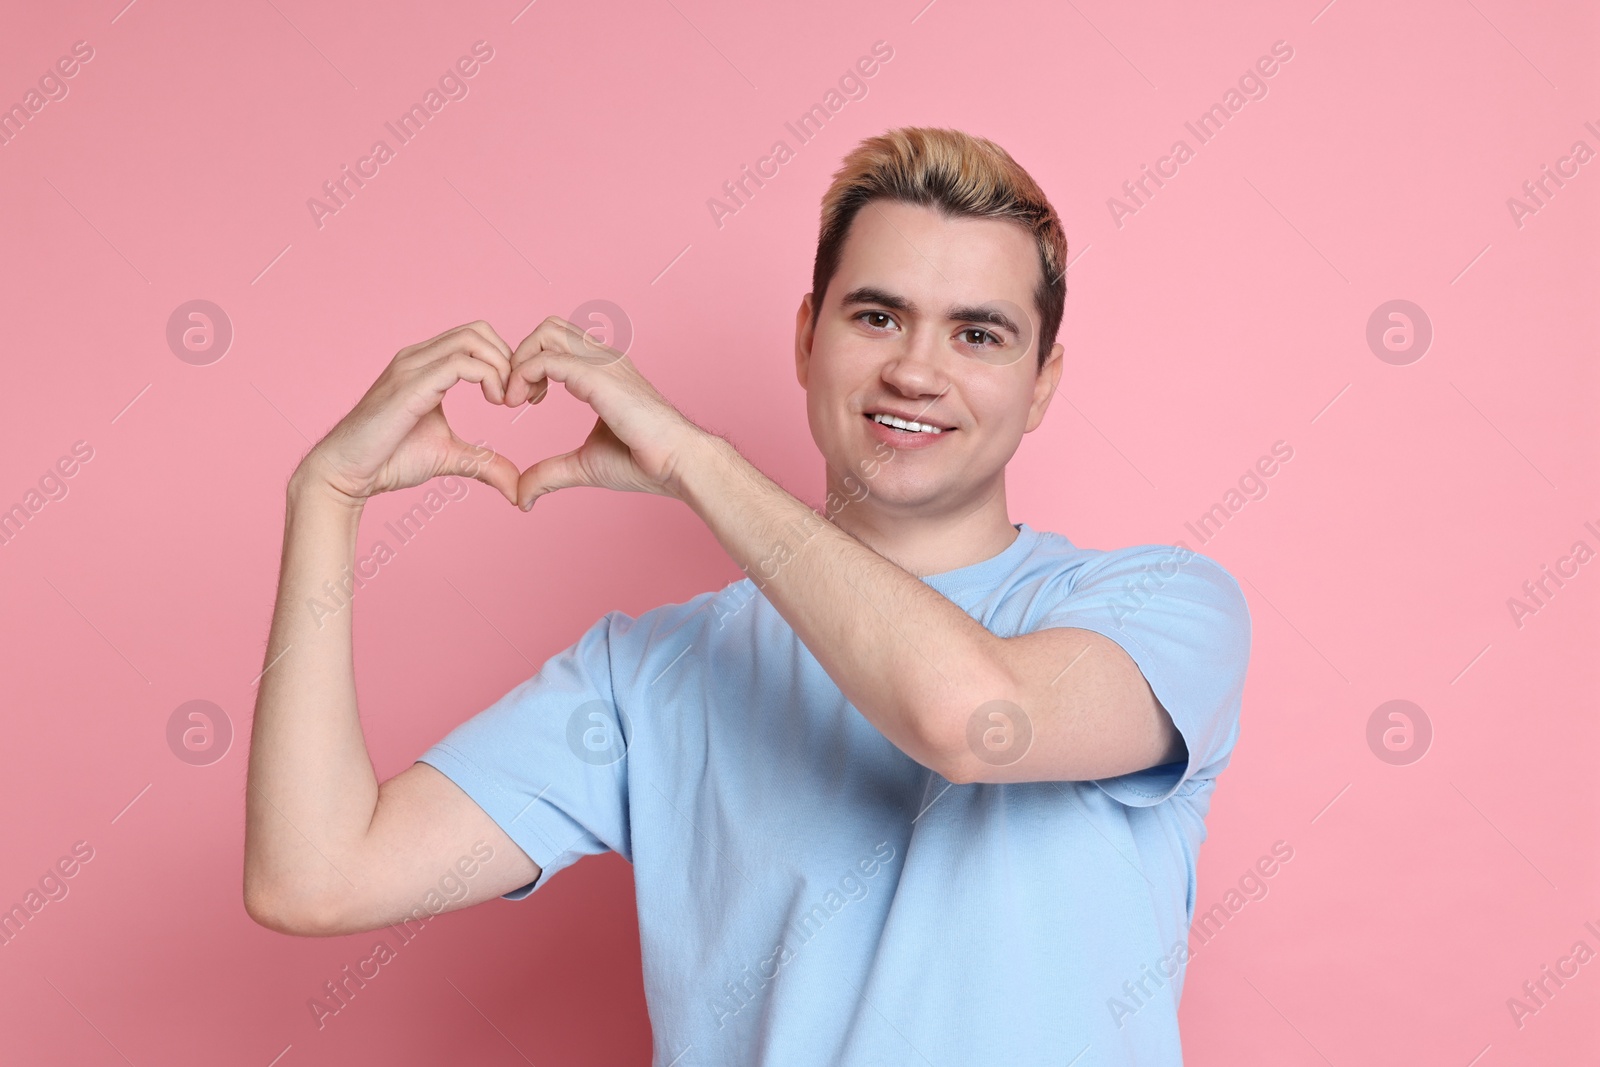 Photo of Young man showing heart gesture with hands on pink background